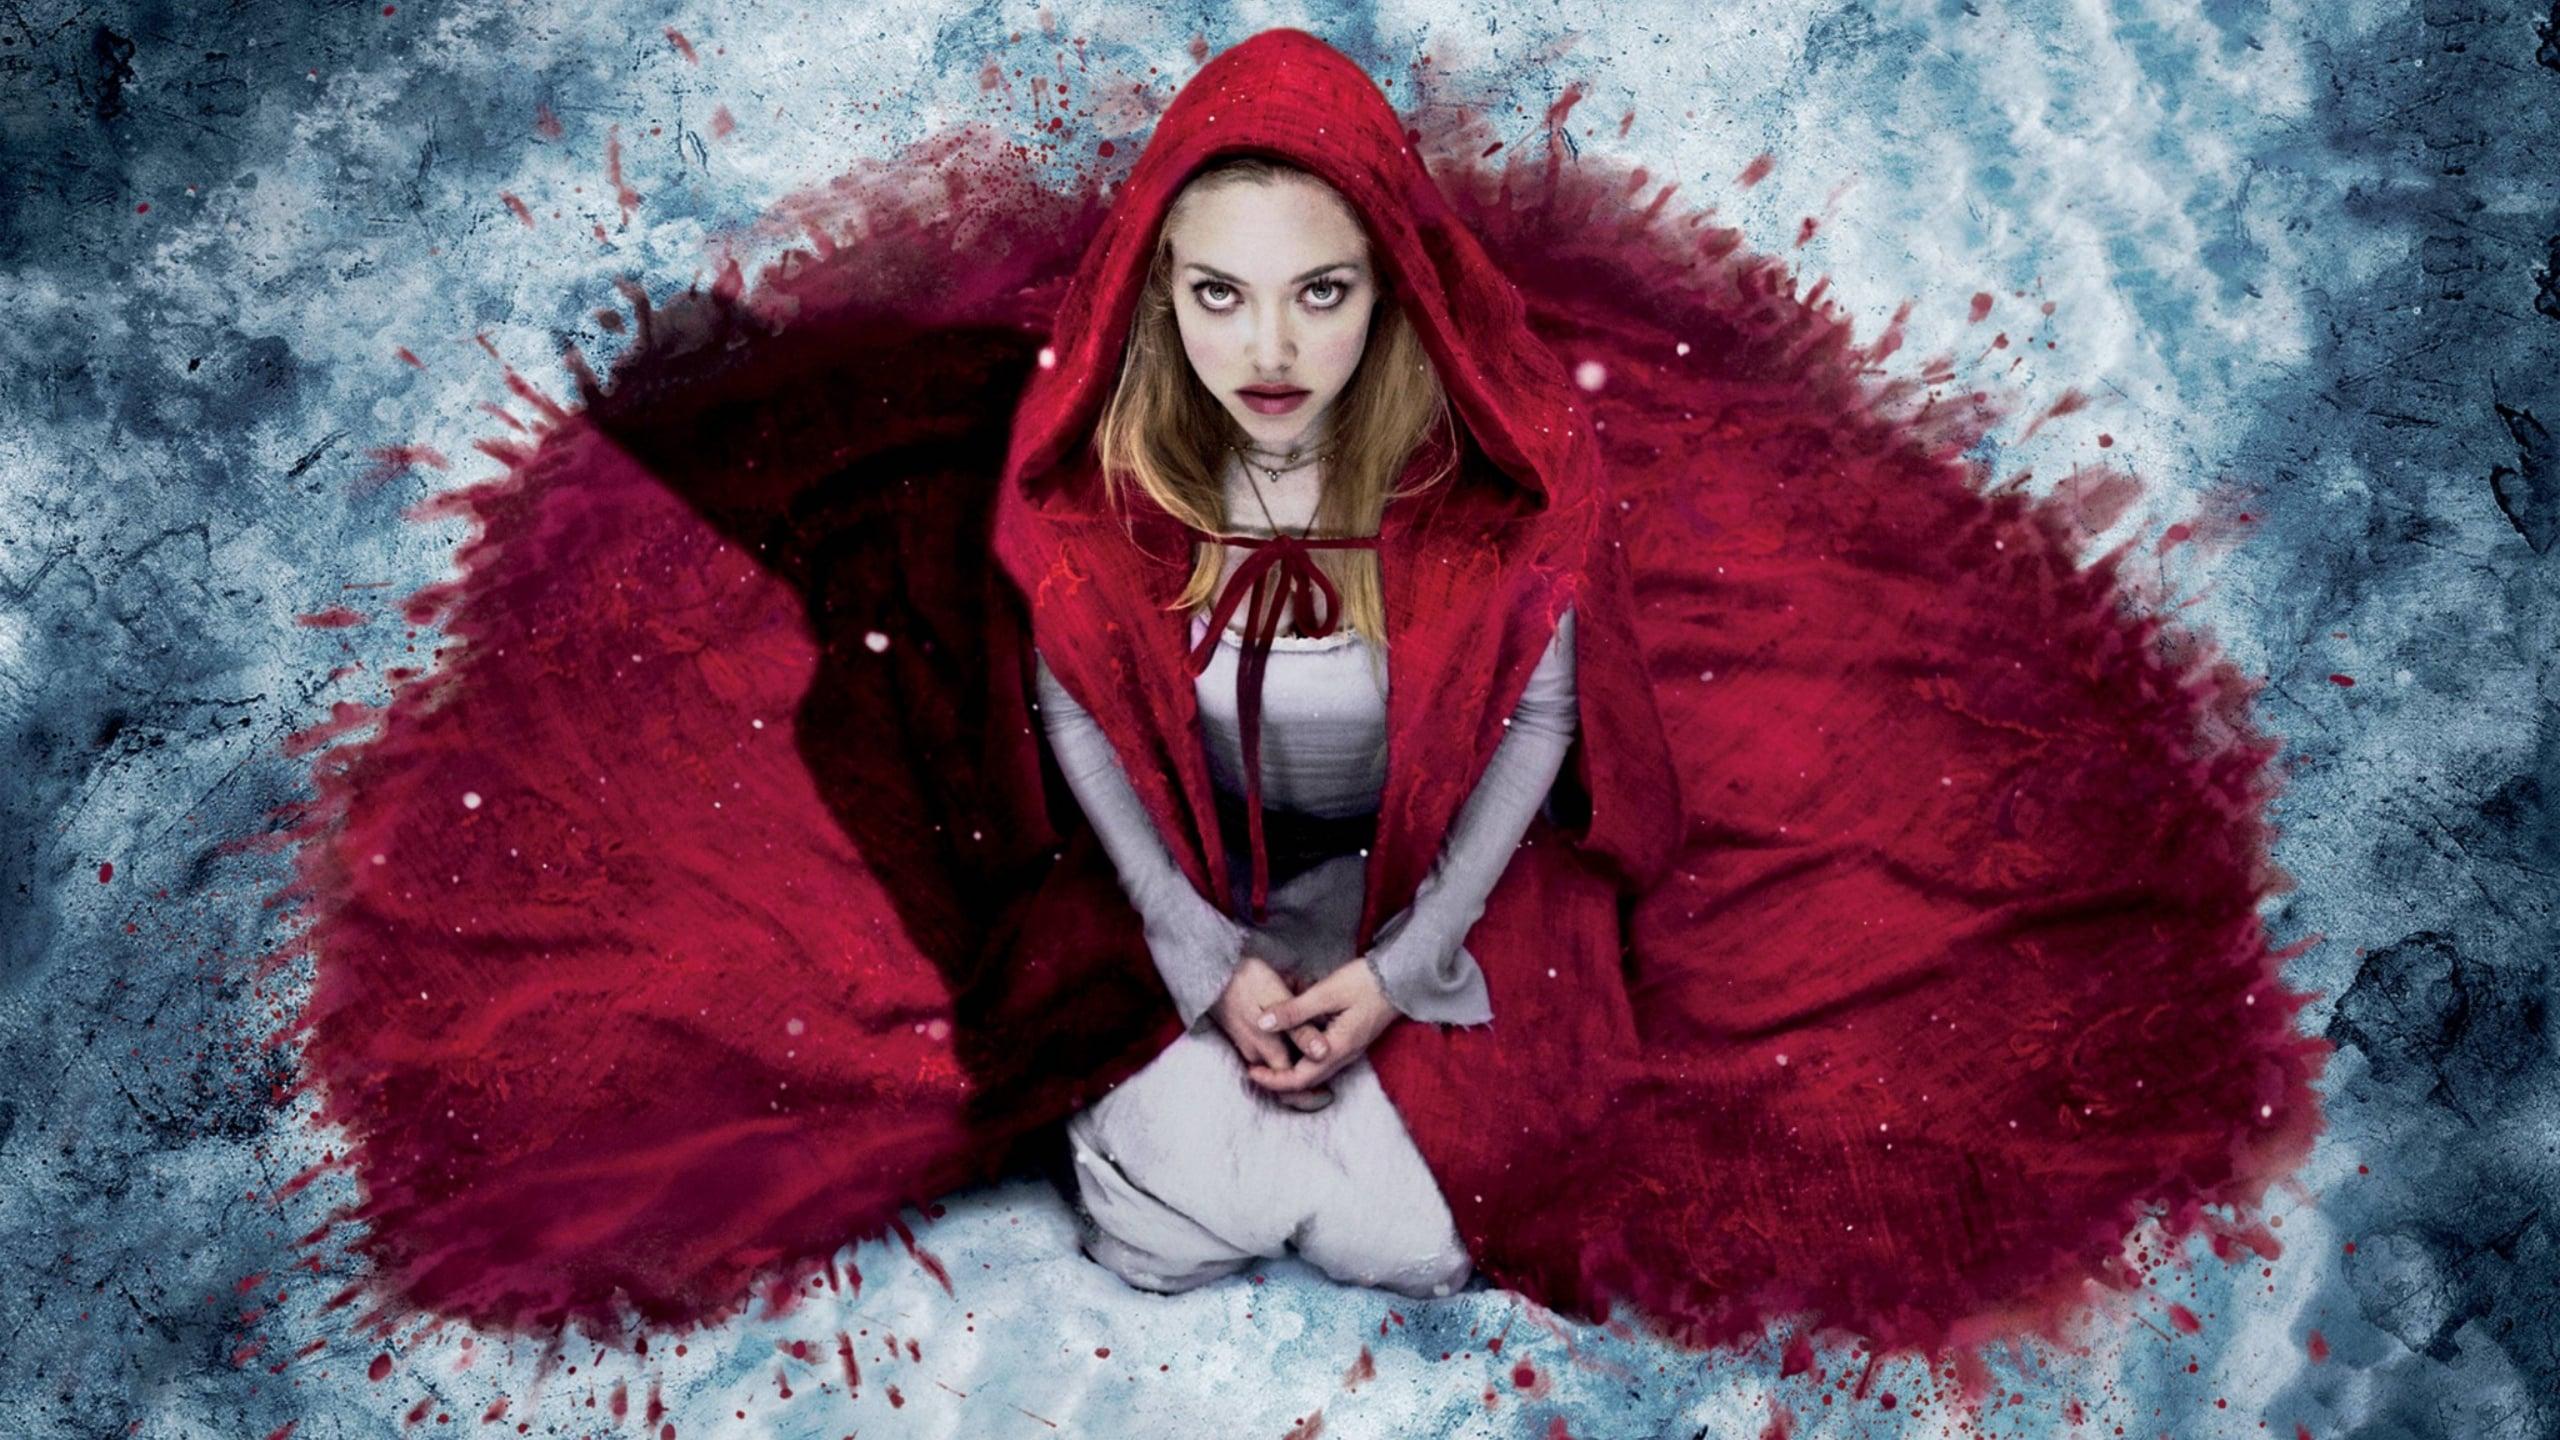 Red Riding Hood backdrop